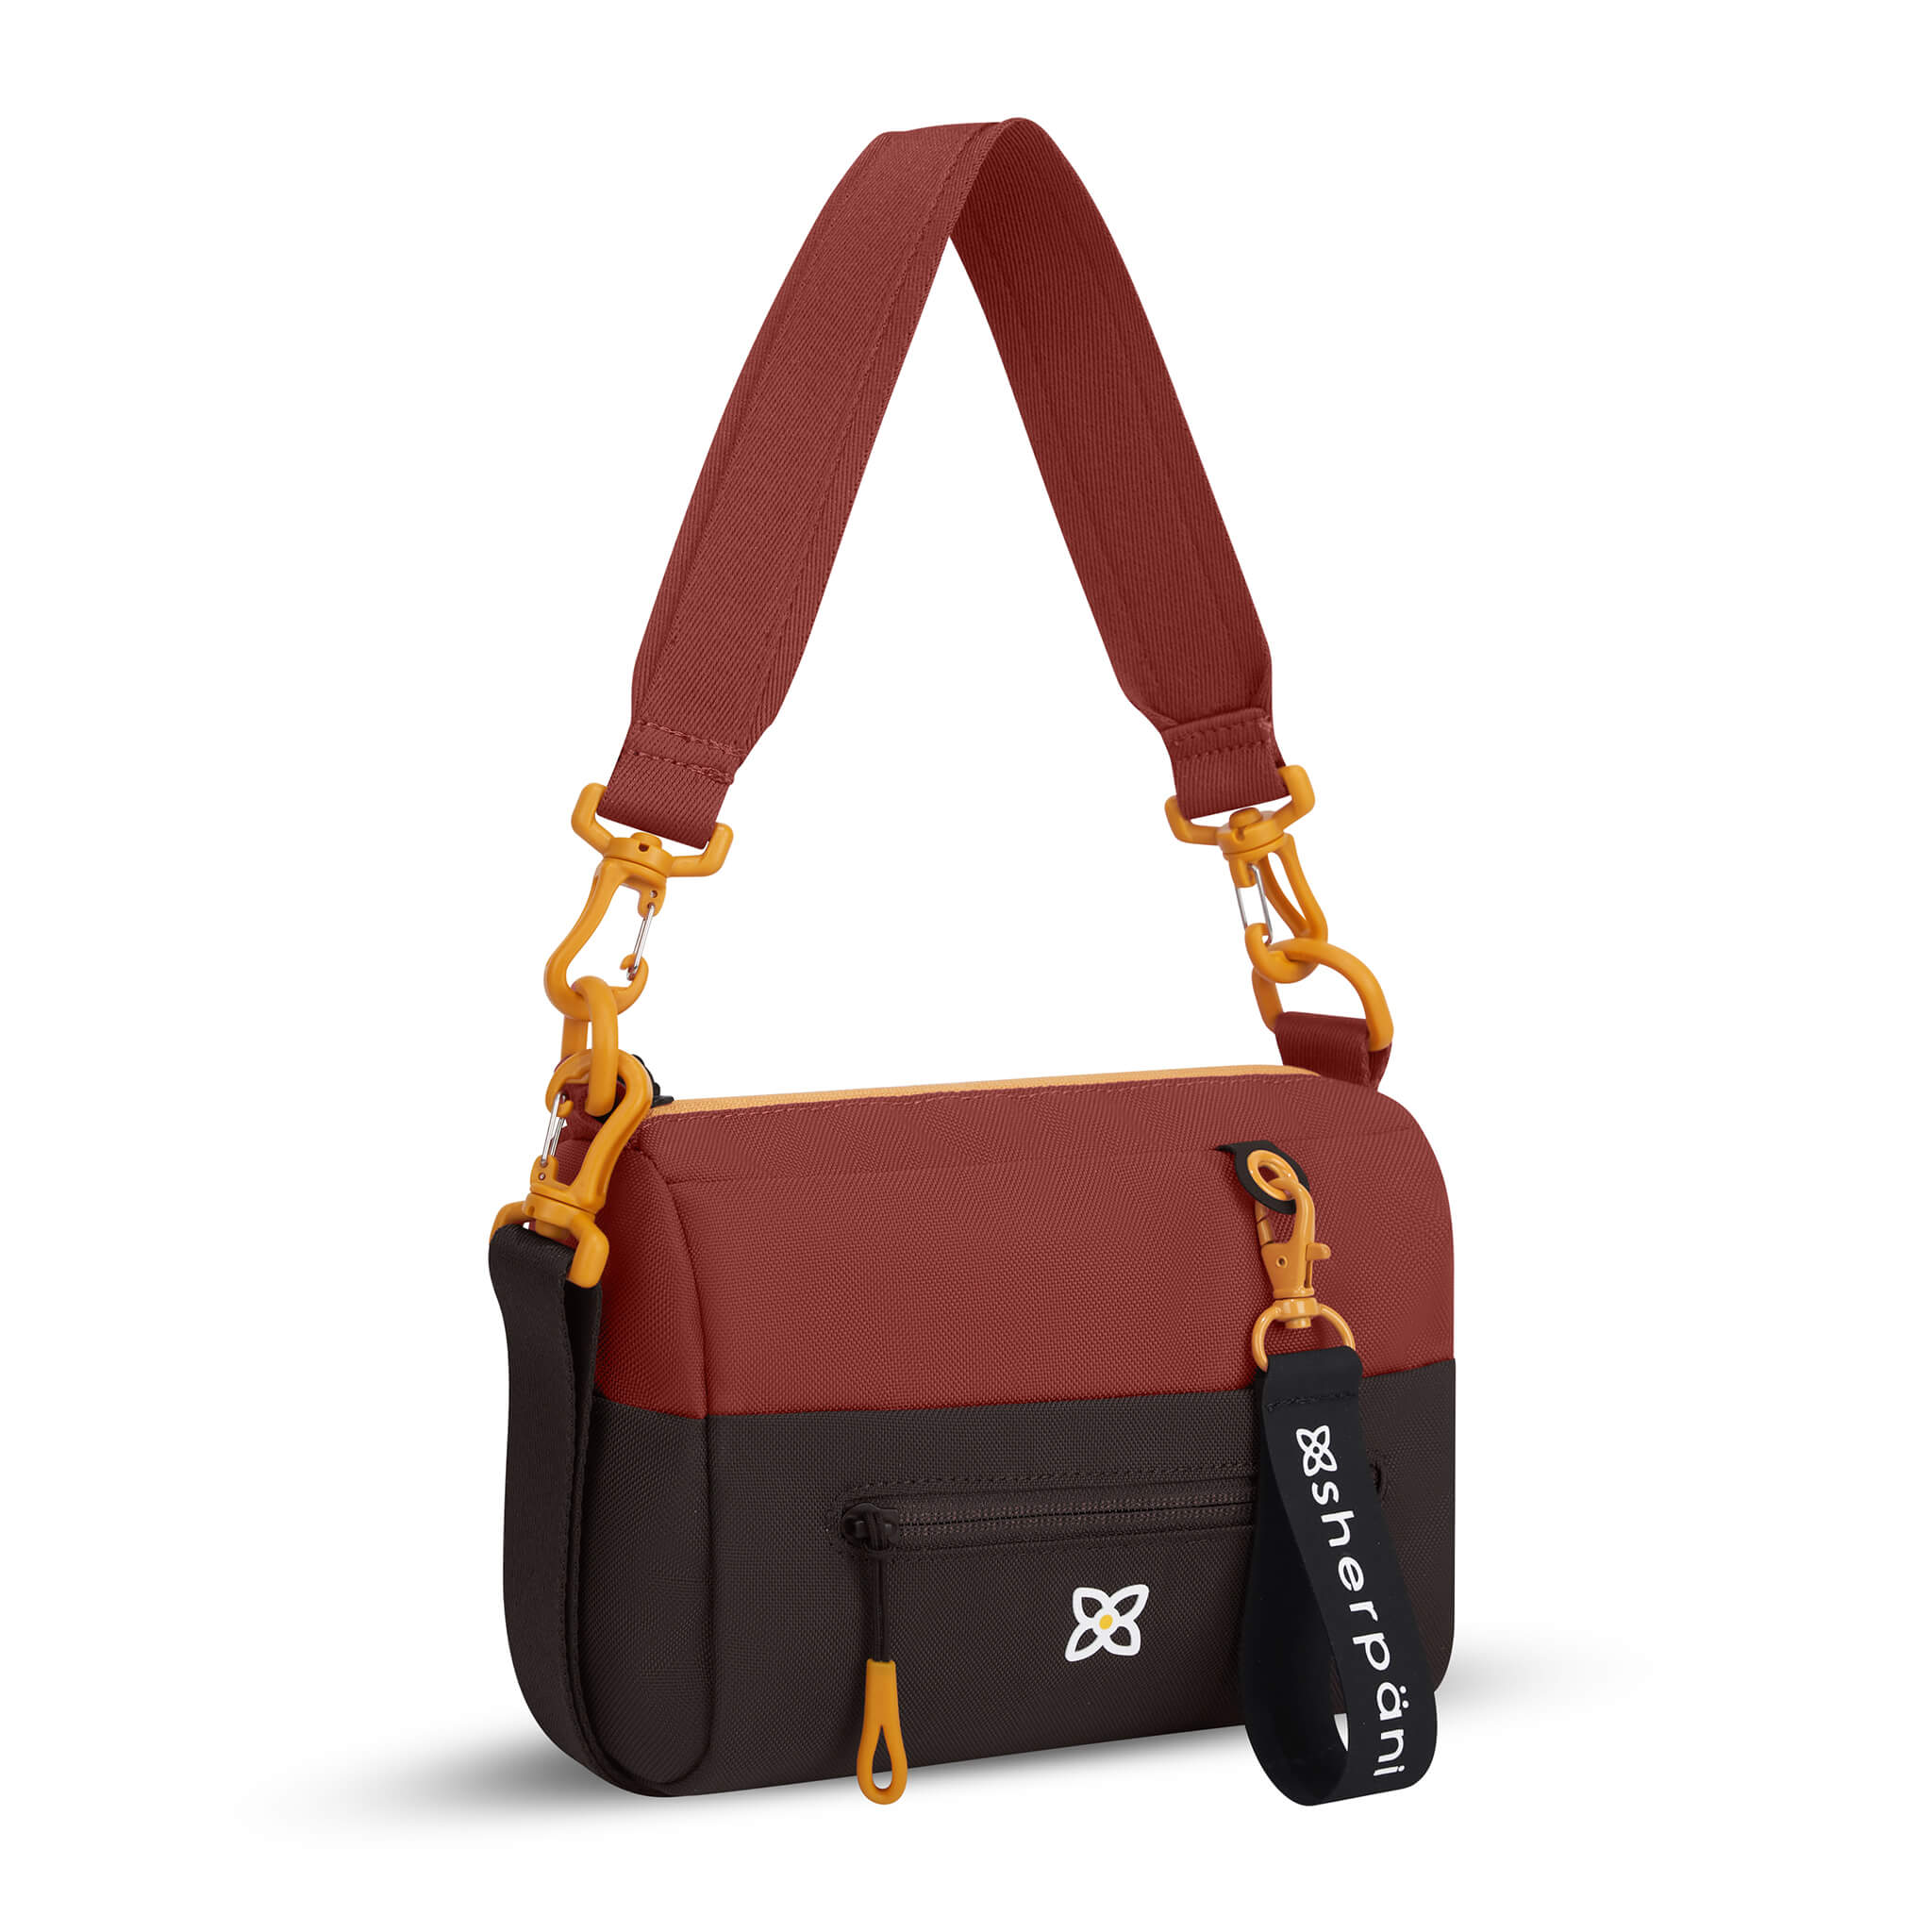 Angled front view of Sherpani mini shoulder bag, the Skye in Cider. Skye features include RFID security, detachable keychain, outside zipper pocket, two inside zipper pockets and two removable straps: a short shoulder strap and a longer adjustable crossbody strap. The Cider color is two-toned in burgundy and dark brown with yellow accents.